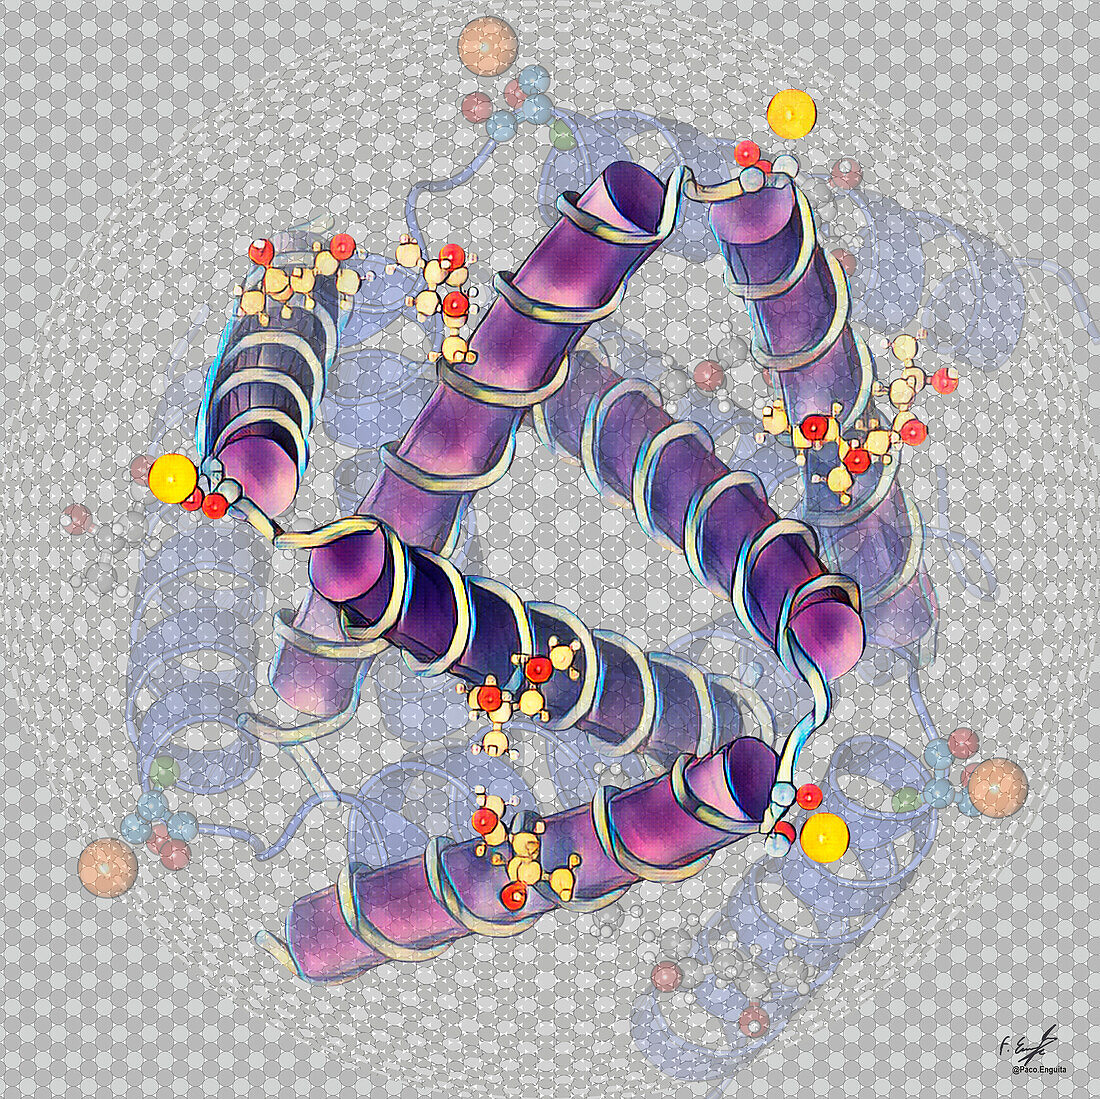 Synthetic trefoil knot protein, illustration